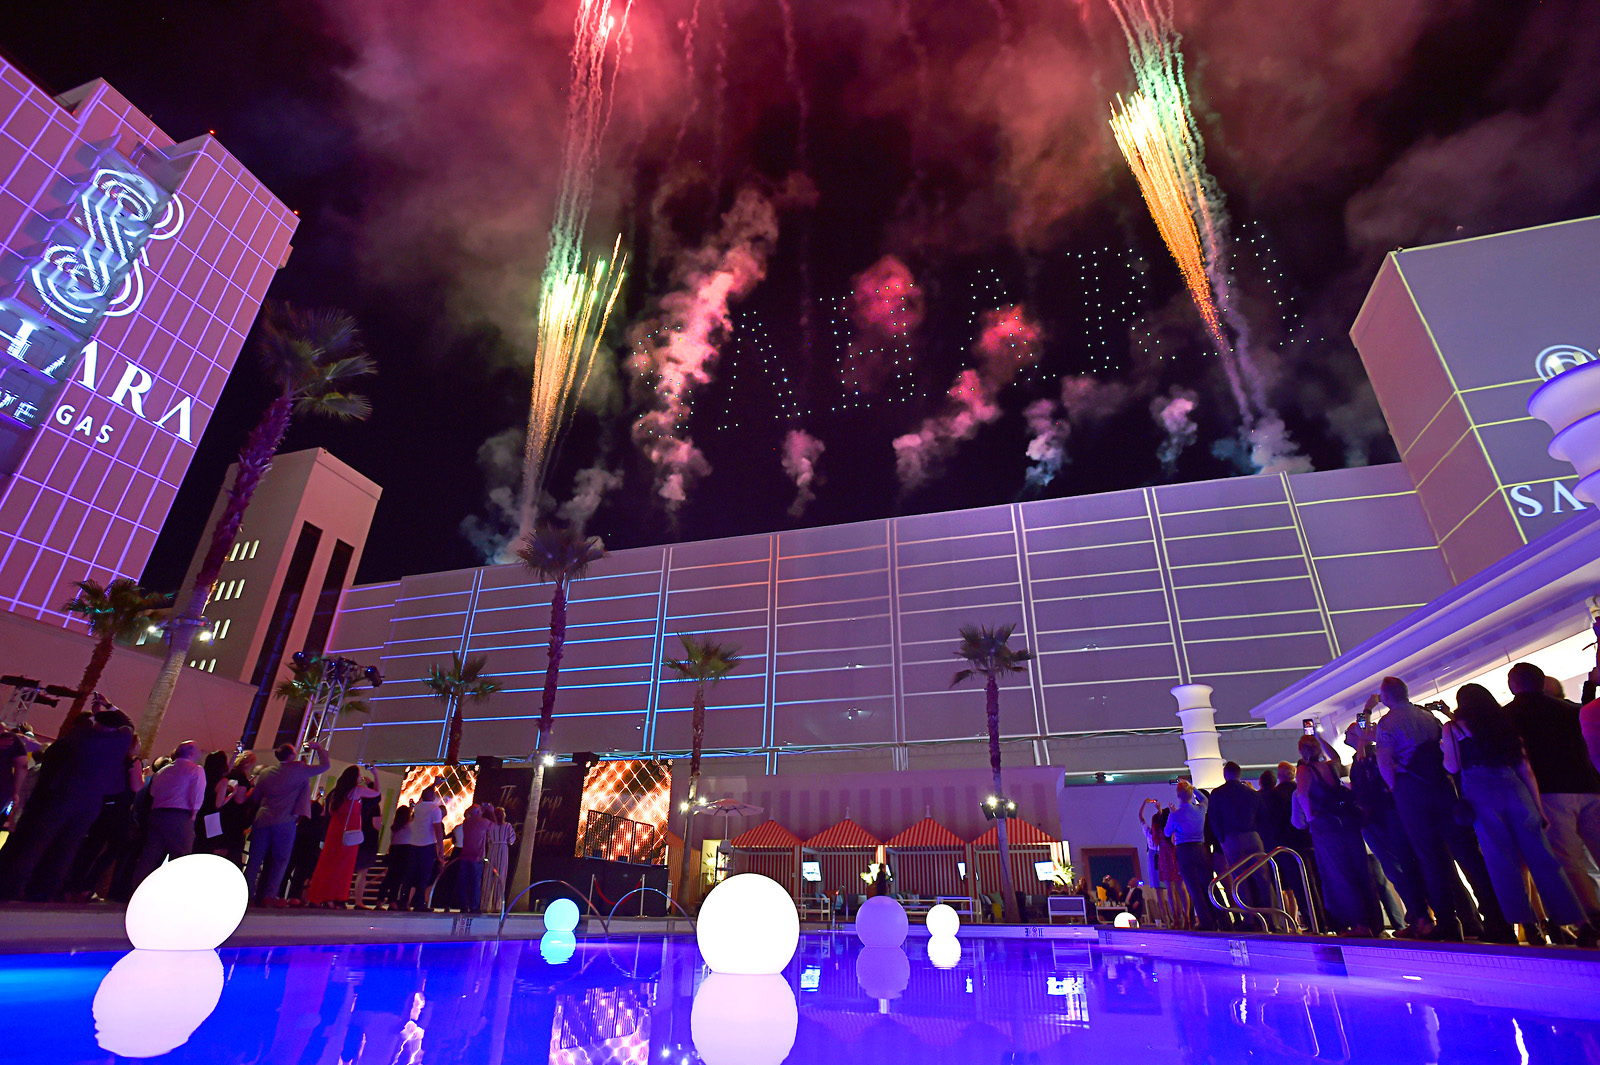 Flying drones light up the word "SAHARA" as the SLS Las Vegas is rebranded to Sahara Las Vegas during an announcement event at the Foxtail Pool at SLS Las Vegas on Thursday, June 27, 2019, in Las Vegas.